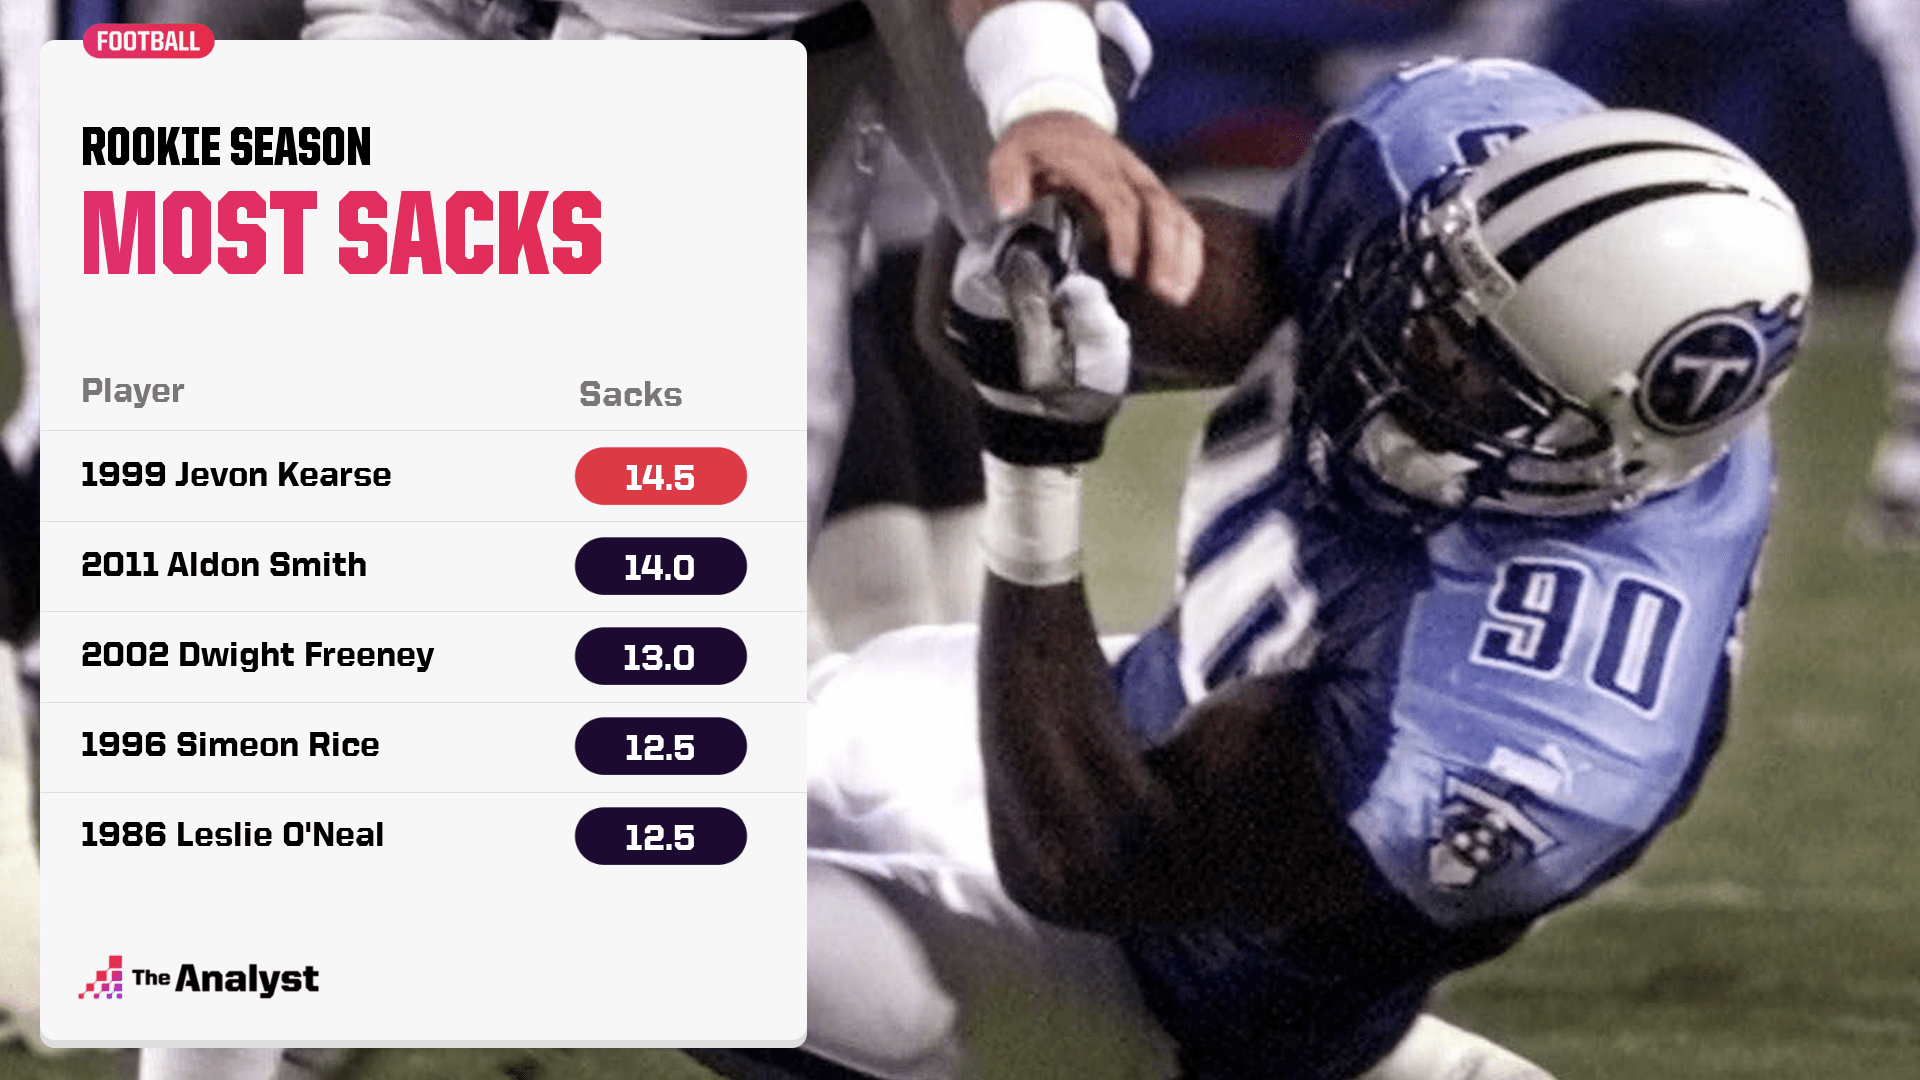 Most sacks for a rookie